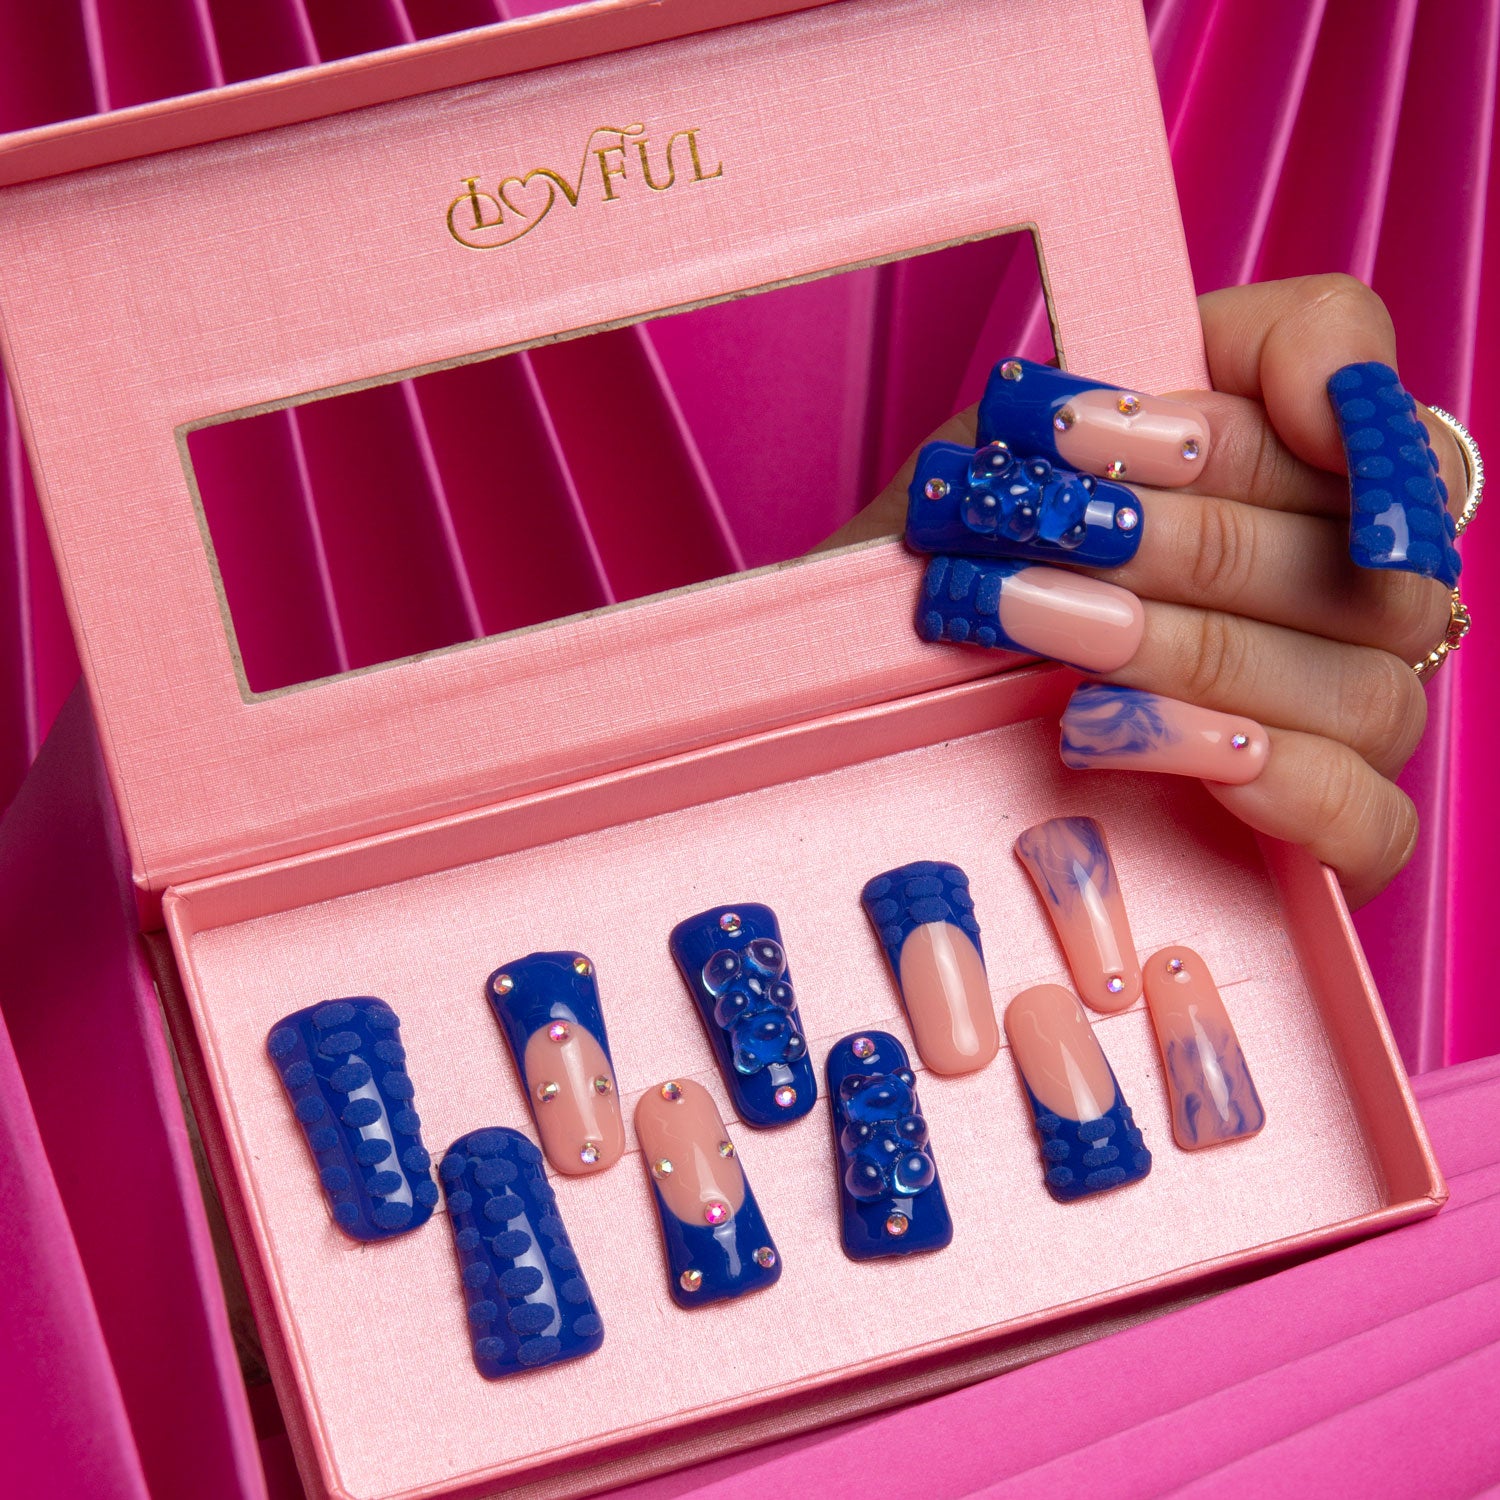 Lovful press-on nails set in a pink box with blue rhinestone gummy bear designs and hand-drawn 3D dots, displayed on a hand against a bright pink background